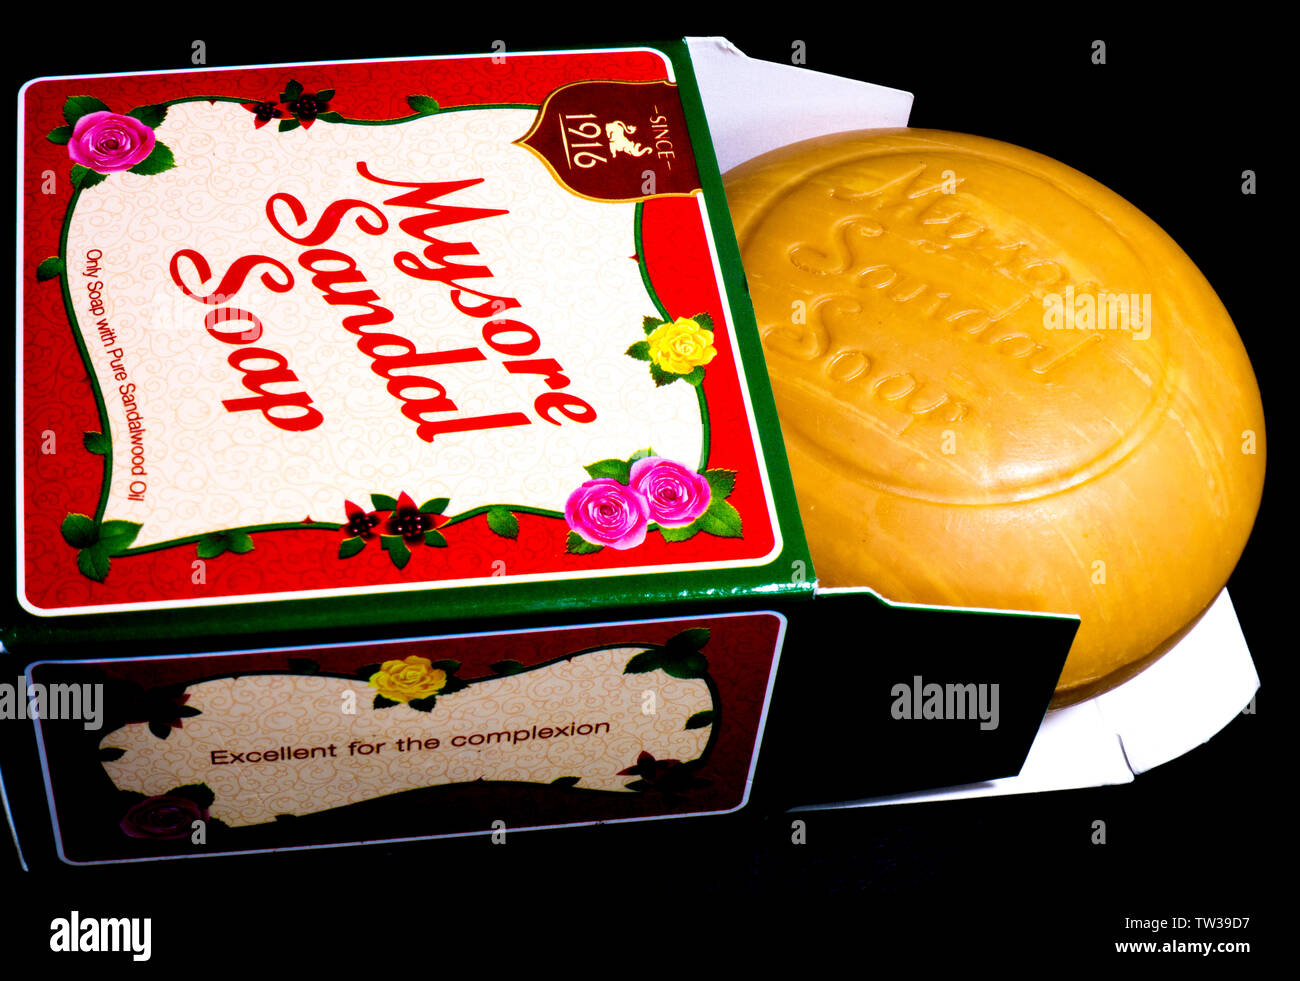 A fresh bar of Mysore sandal soap in its presentation box, a brand manufactured since 1916 by Indian company Karnataka Soaps and Detergents. Stock Photo